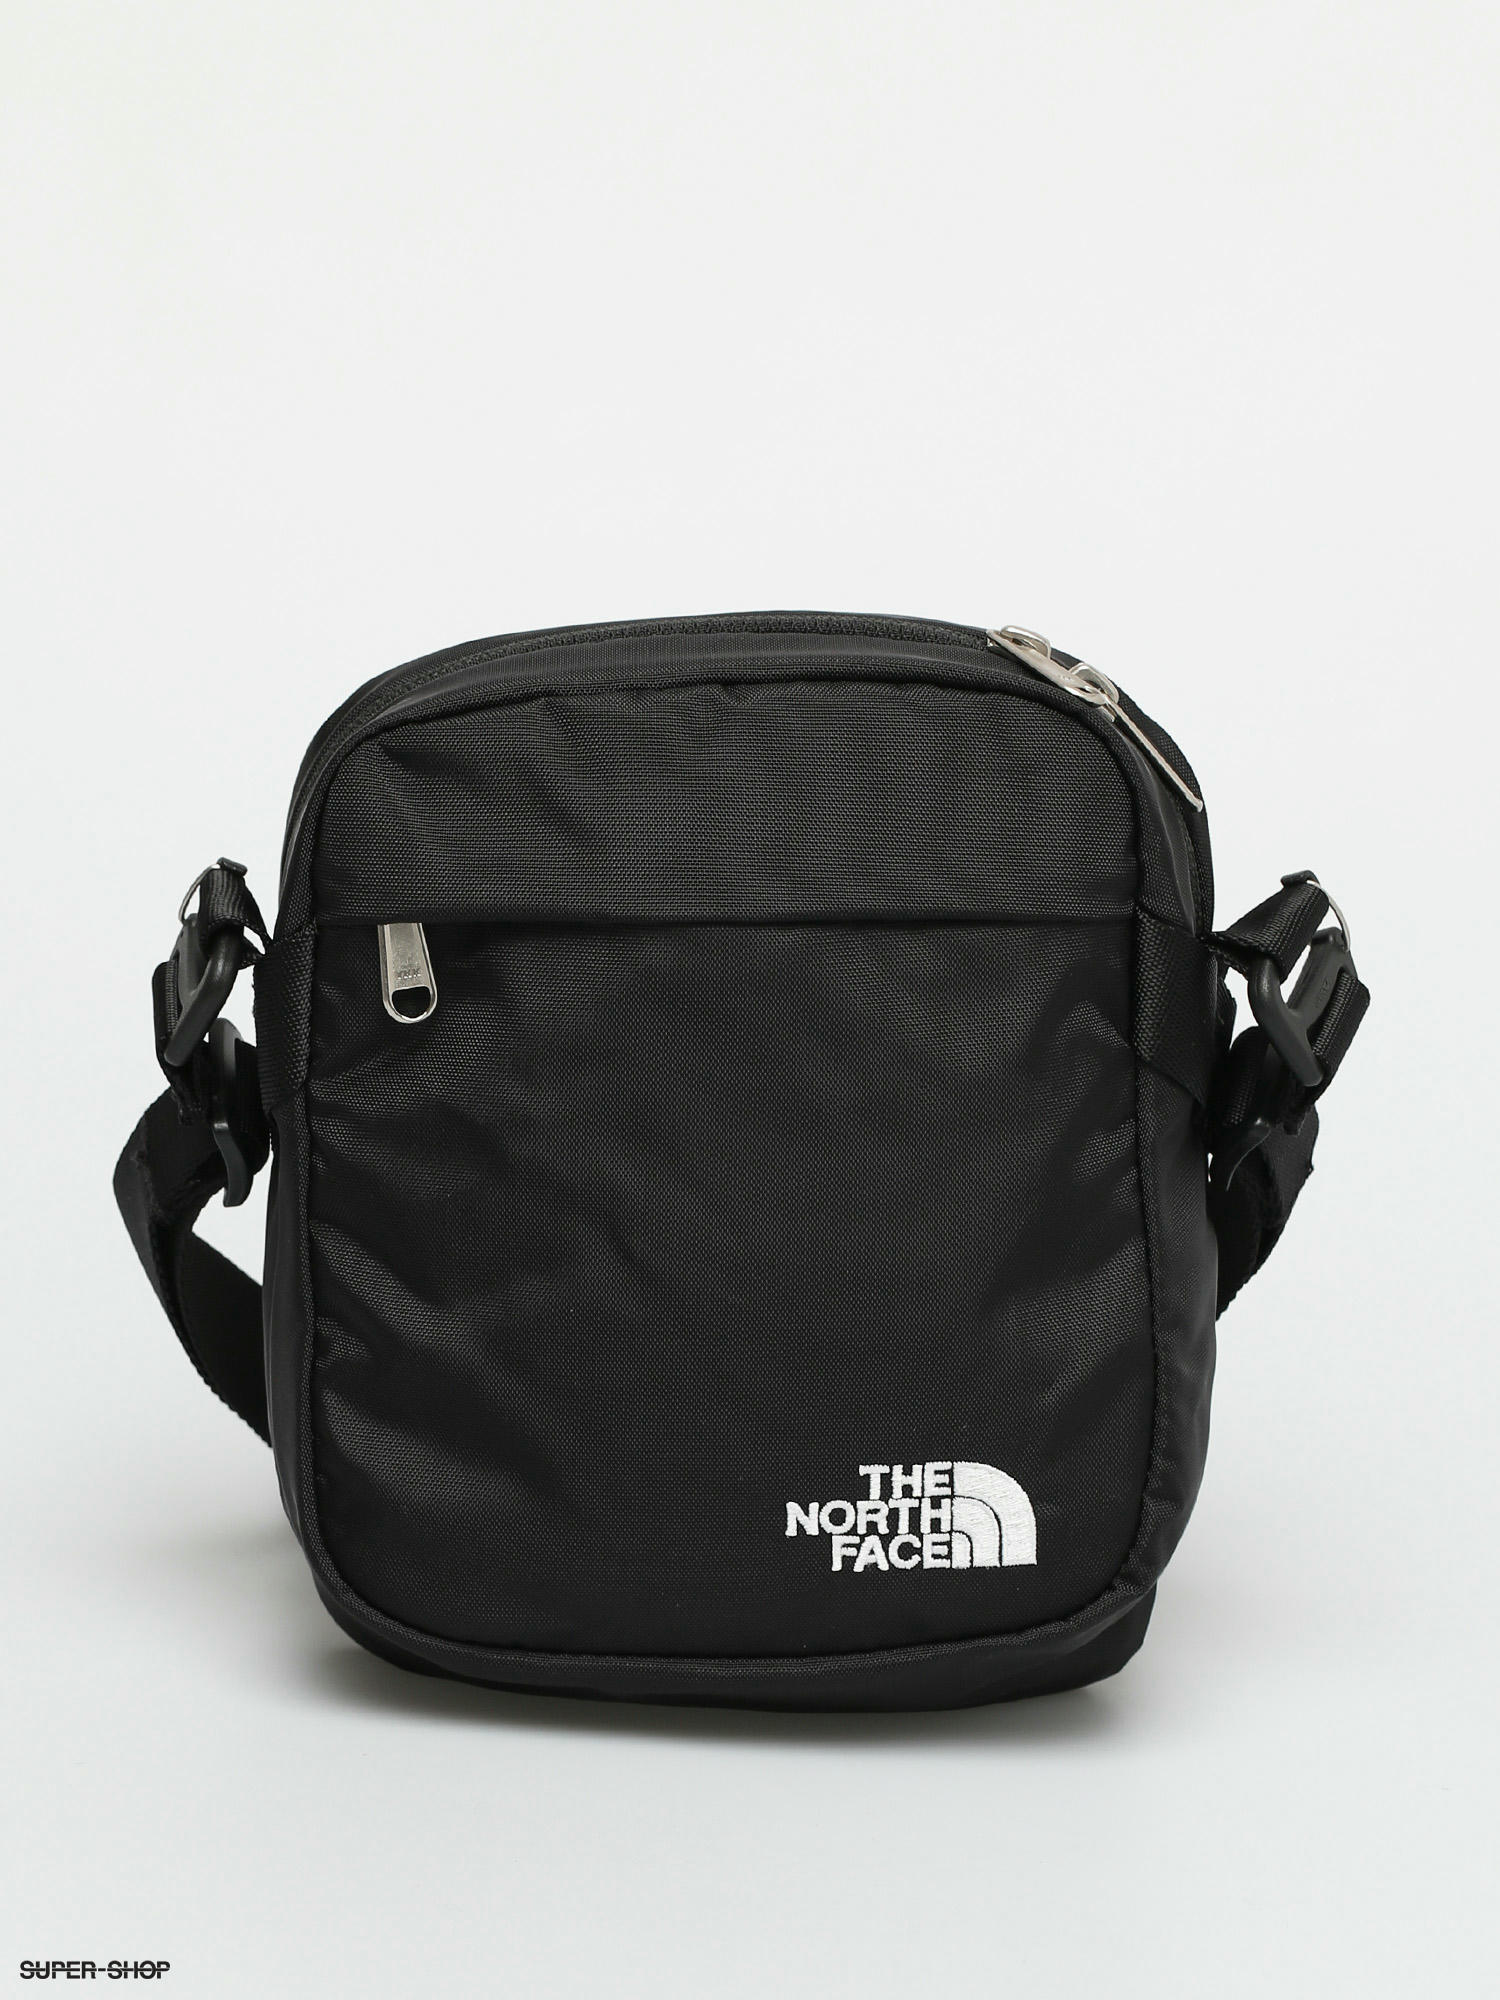 the north face black bag